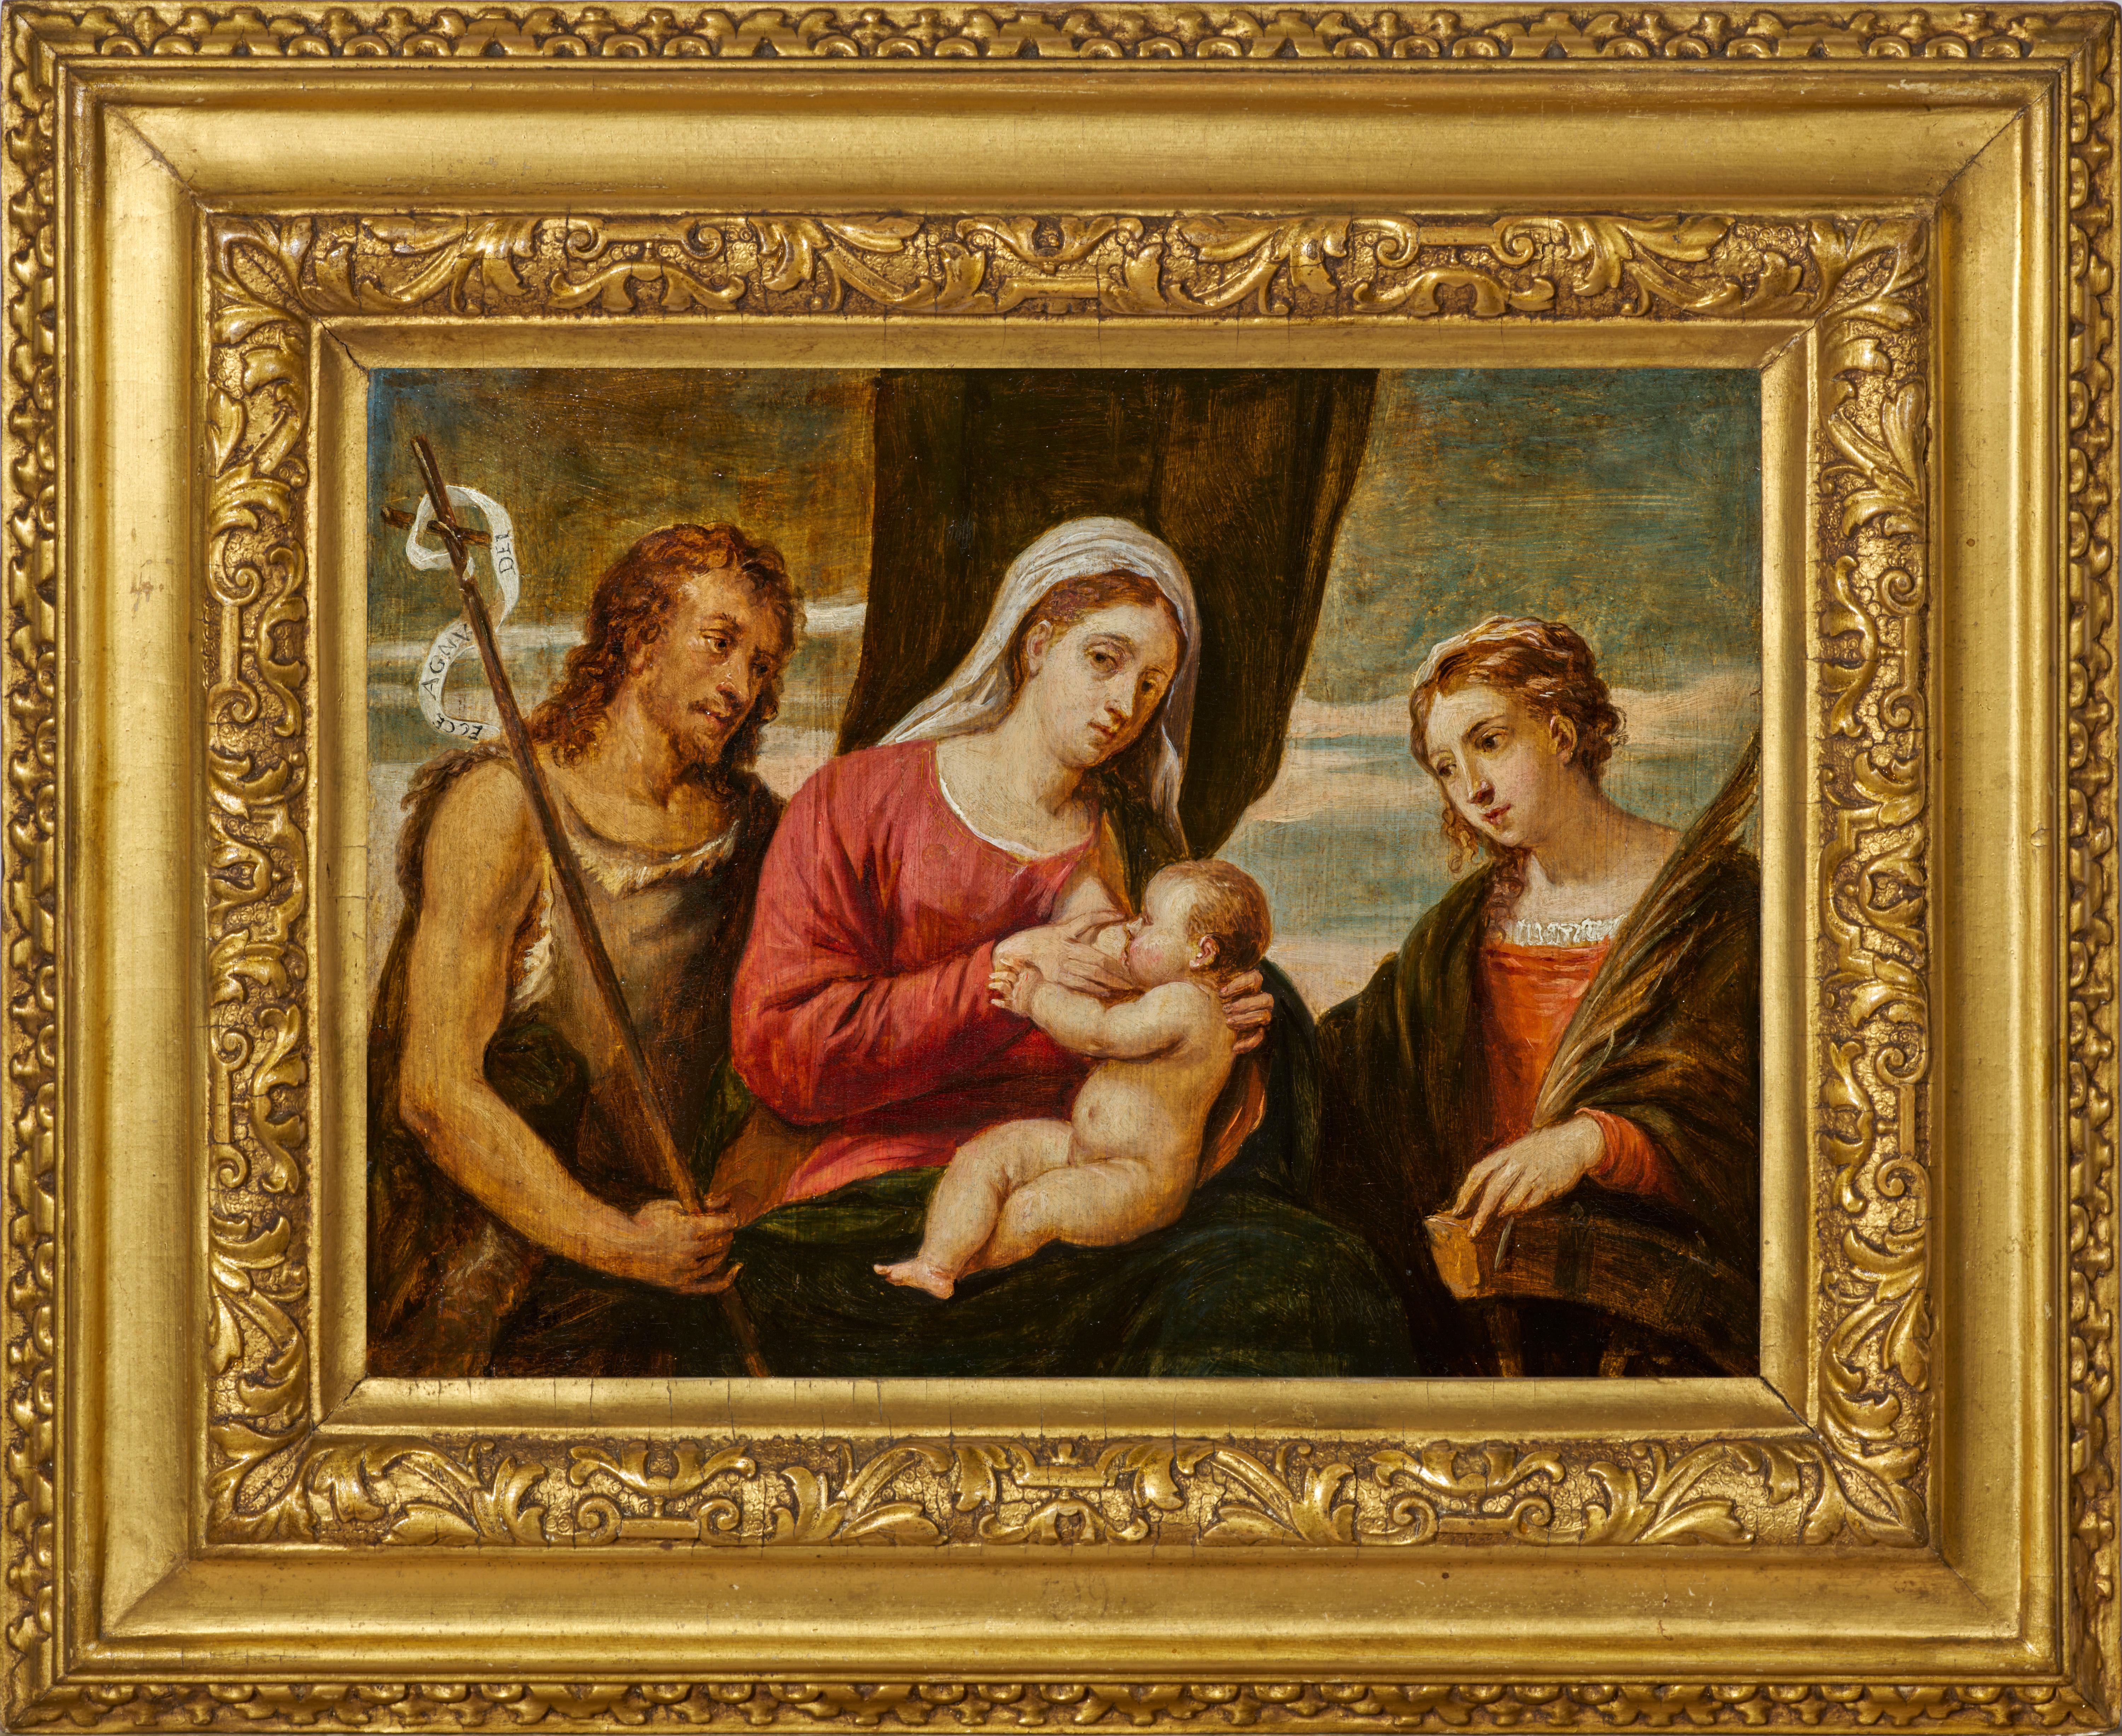 Virgin and Child, a paiting by David Teniers the Younger after Palma Vecchio